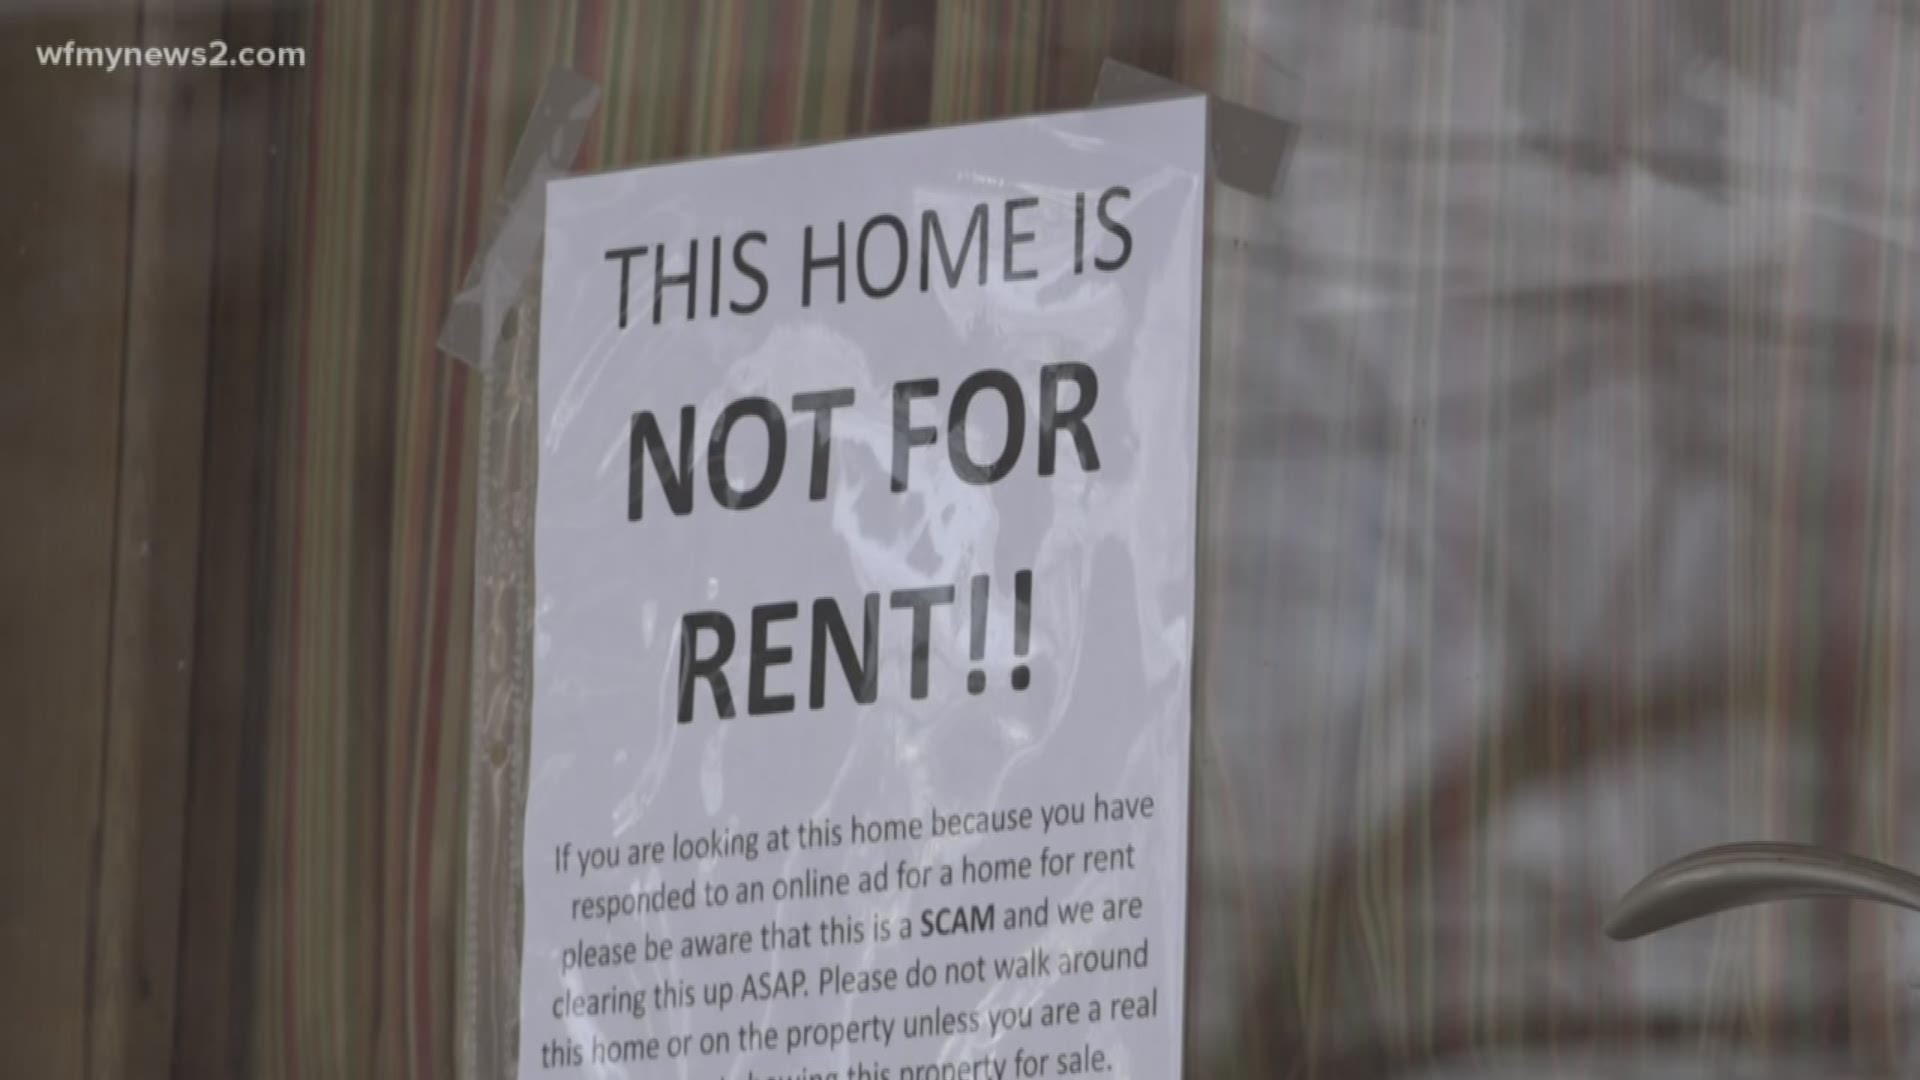 A Greensboro woman has to put a sign on her door telling people the house is not for rent. Scammers are using her For Sale listing and duping people into sending rent deposits.